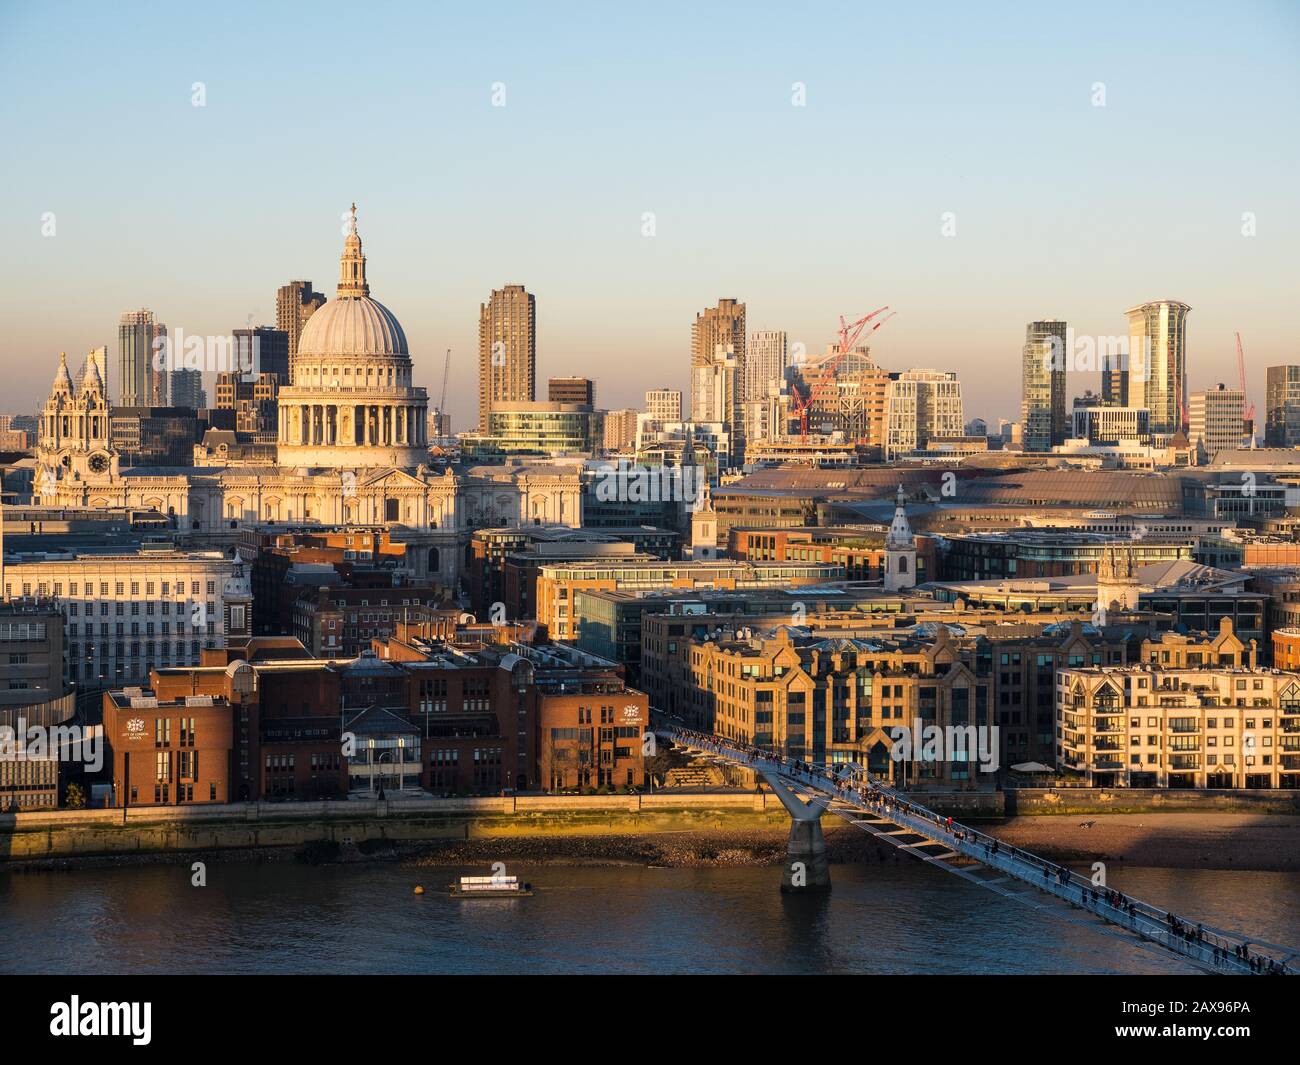 Cathédrale St Paul, Sunset, City of London, Angleterre, Royaume-Uni, GB. Banque D'Images